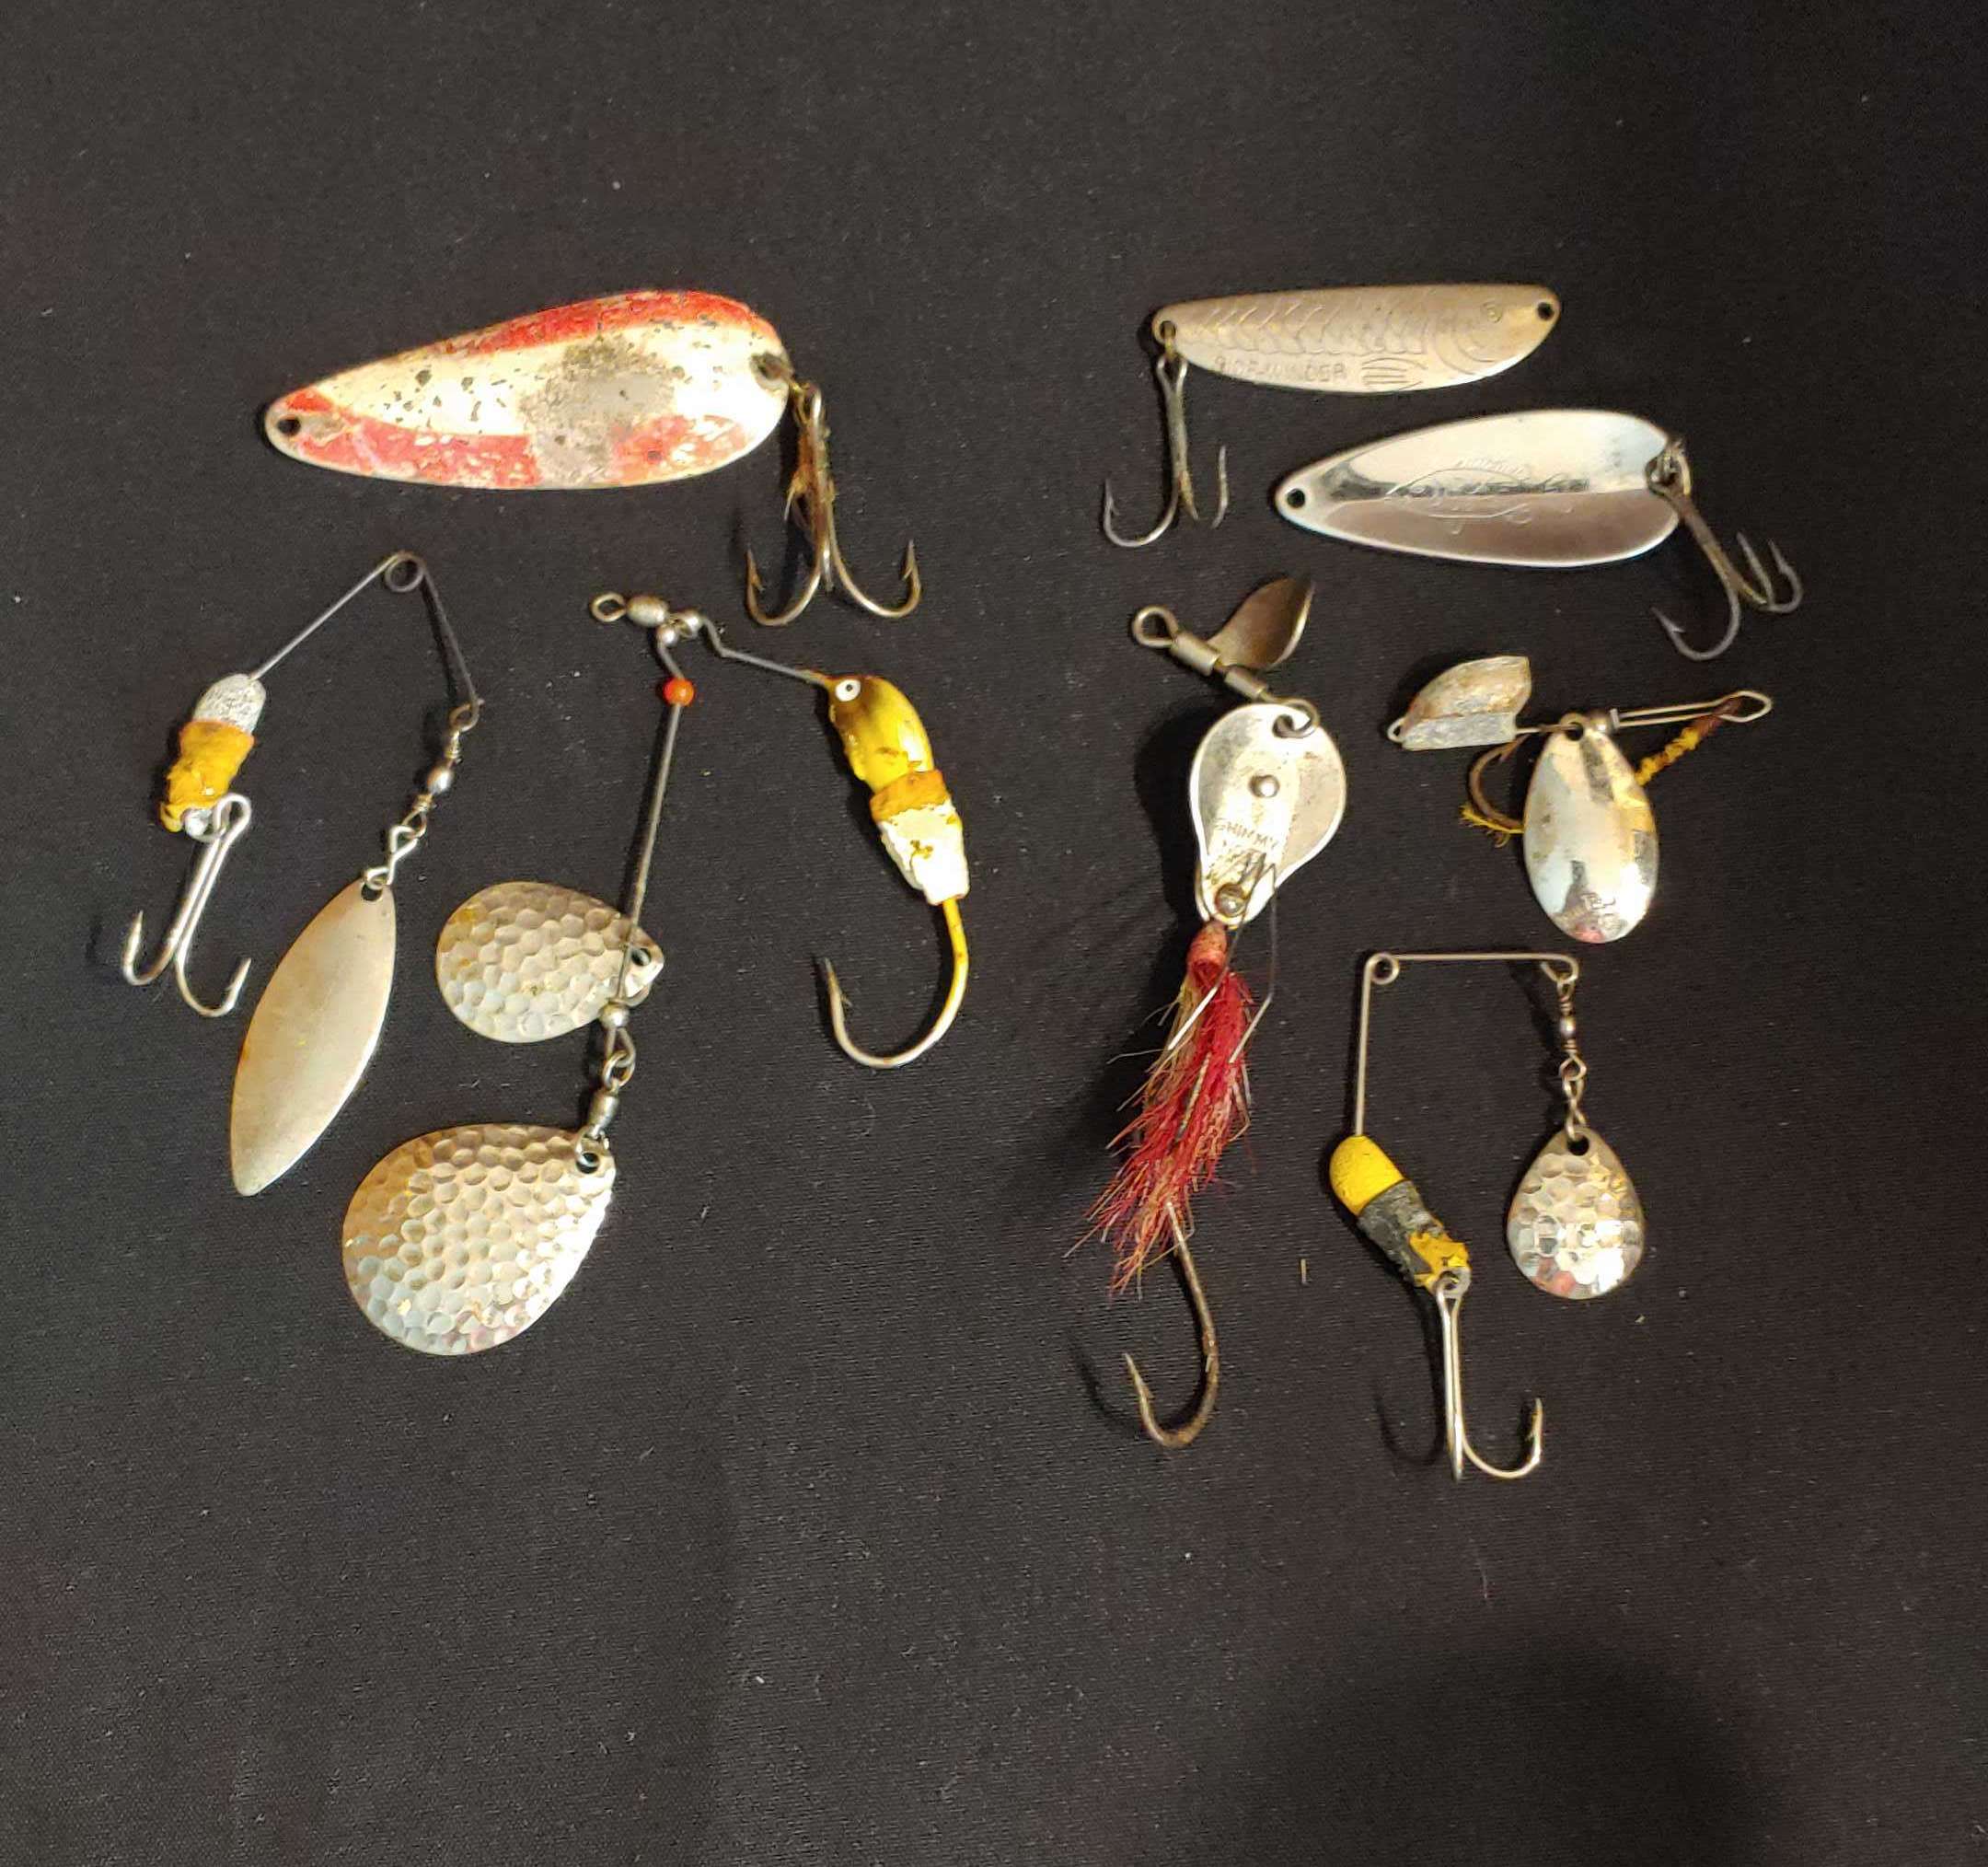 At Auction: OVERSIZED WALL HANGER FISHING LURE